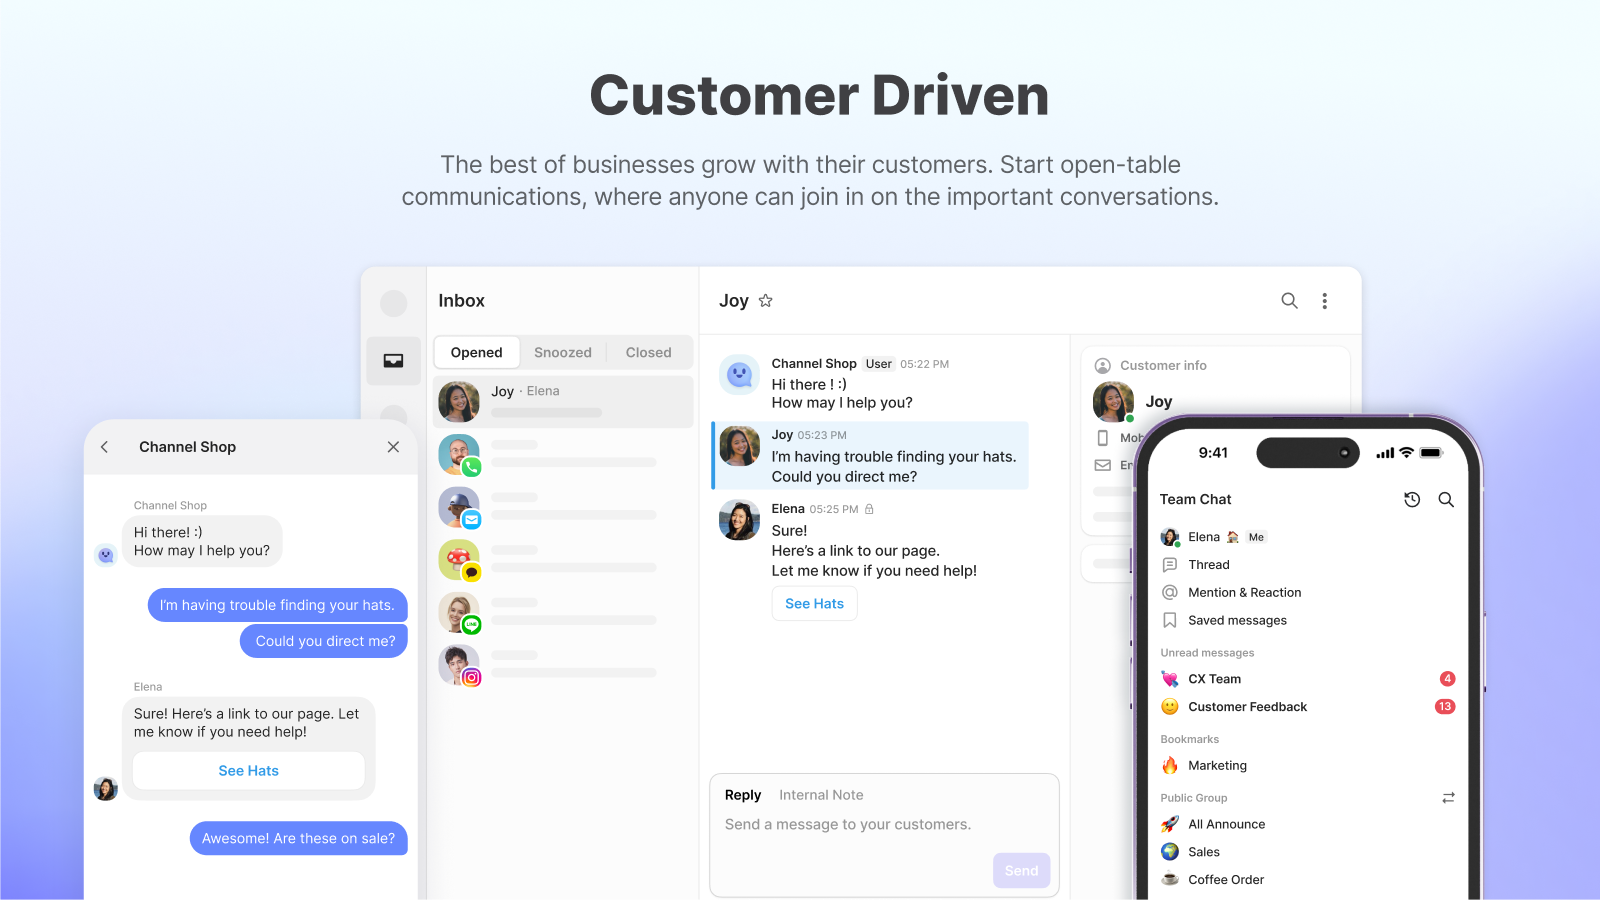 Customer Driven - The best of businesses grow with their customers. Start open-table communications, where anyone can join in on the important conversations.